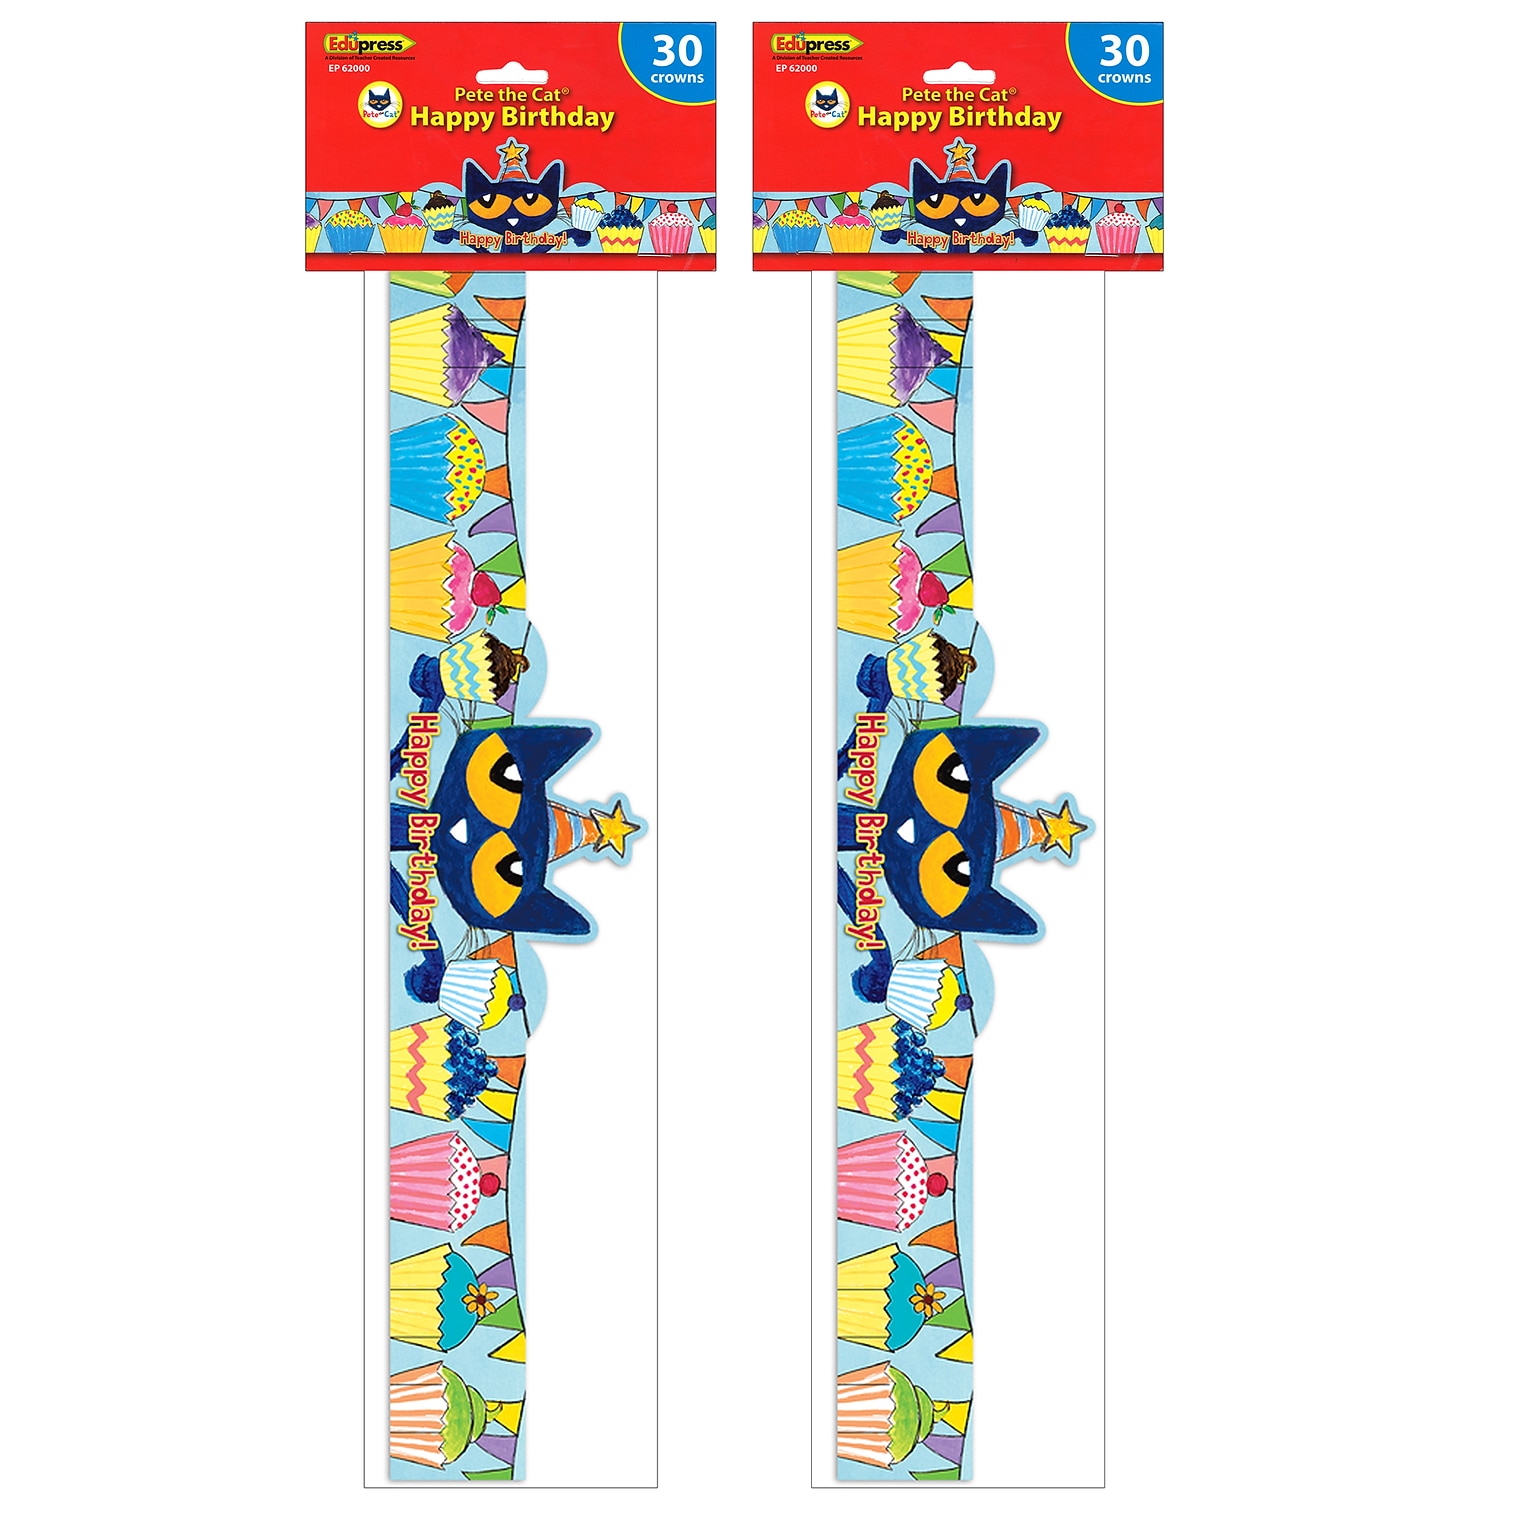 Teacher Created Resources Pete the Cat Happy Birthday Crowns, 24 x 4-3/4, Multicolor, 30/Pack, 2 Packs (EP-62000-2)